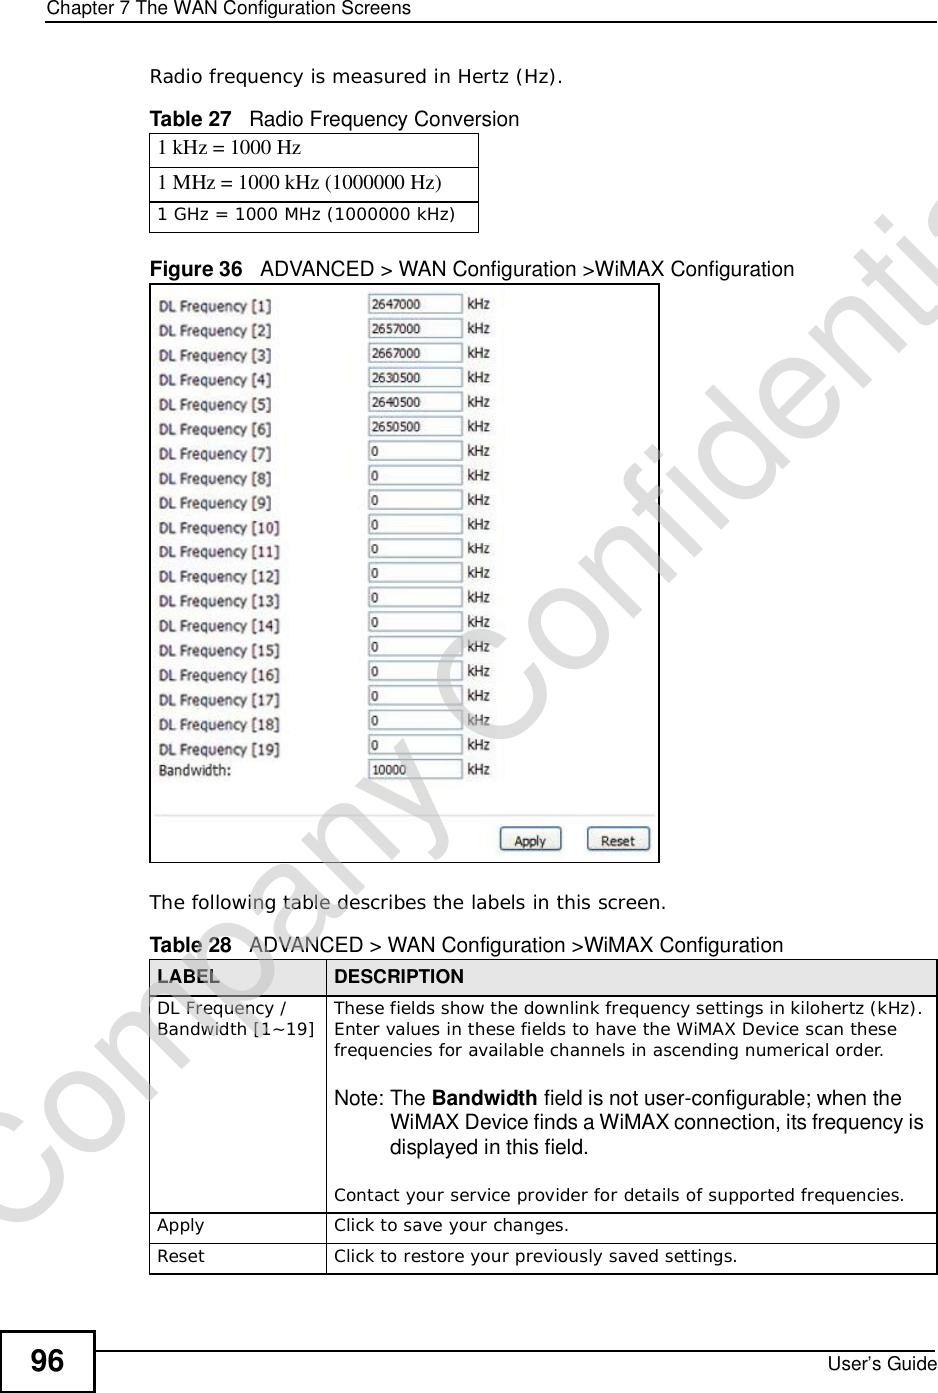 Chapter 7The WAN Configuration ScreensUser’s Guide96Radio frequency is measured in Hertz (Hz). Figure 36   ADVANCED &gt; WAN Configuration &gt;WiMAX Configuration   The following table describes the labels in this screen.Table 27   Radio Frequency Conversion1 kHz = 1000 Hz1 MHz = 1000 kHz (1000000 Hz)1 GHz = 1000 MHz (1000000 kHz)Table 28   ADVANCED &gt; WAN Configuration &gt;WiMAX ConfigurationLABEL DESCRIPTIONDL Frequency / Bandwidth [1~19] These fields show the downlink frequency settings in kilohertz (kHz). Enter values in these fields to have the WiMAX Device scan these frequencies for available channels in ascending numerical order.Note: The Bandwidth field is not user-configurable; when the WiMAX Device finds a WiMAX connection, its frequency is displayed in this field.Contact your service provider for details of supported frequencies.ApplyClick to save your changes.ResetClick to restore your previously saved settings.Company Confidential